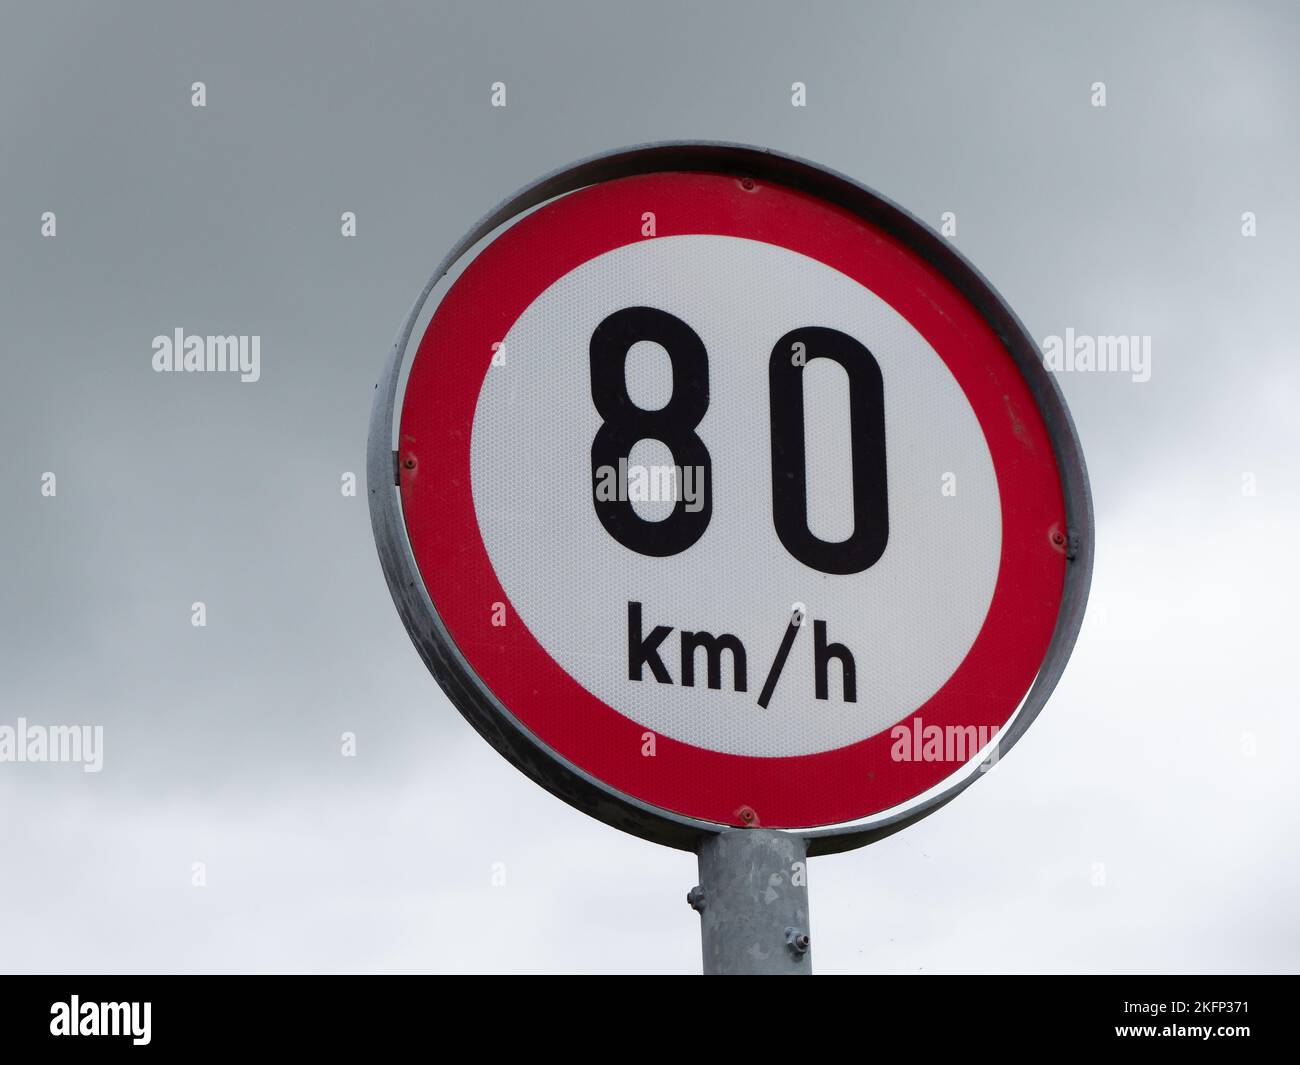 Round sign limiting speed on the background of a cloudy sky. Signs warning of a maximum speed of 80 km h Stock Photo